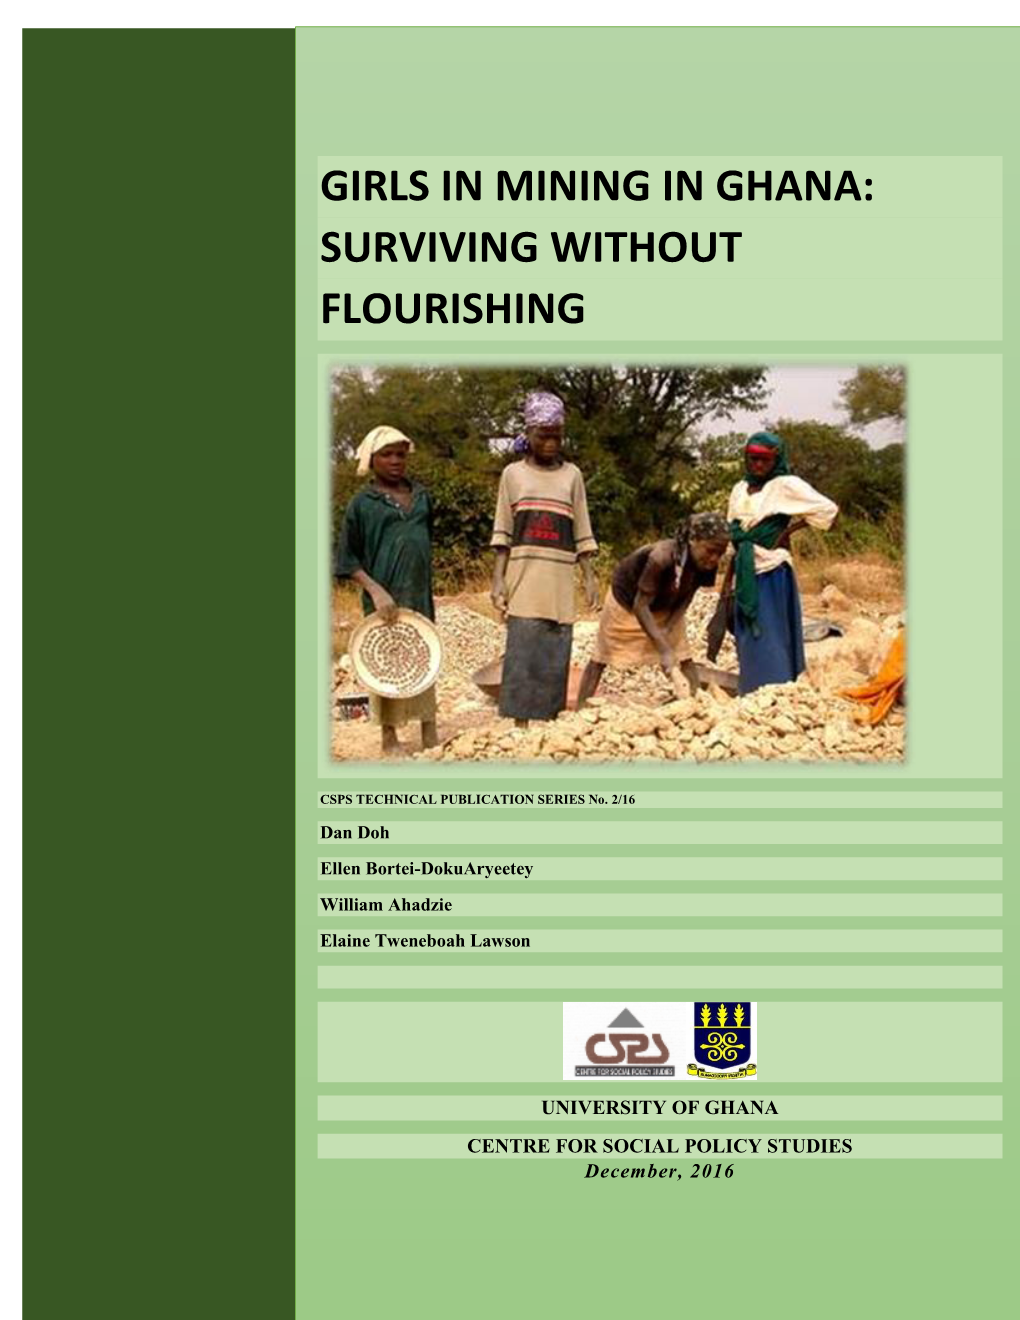 Girls in Mining in Ghana: Surviving Without Flourishing